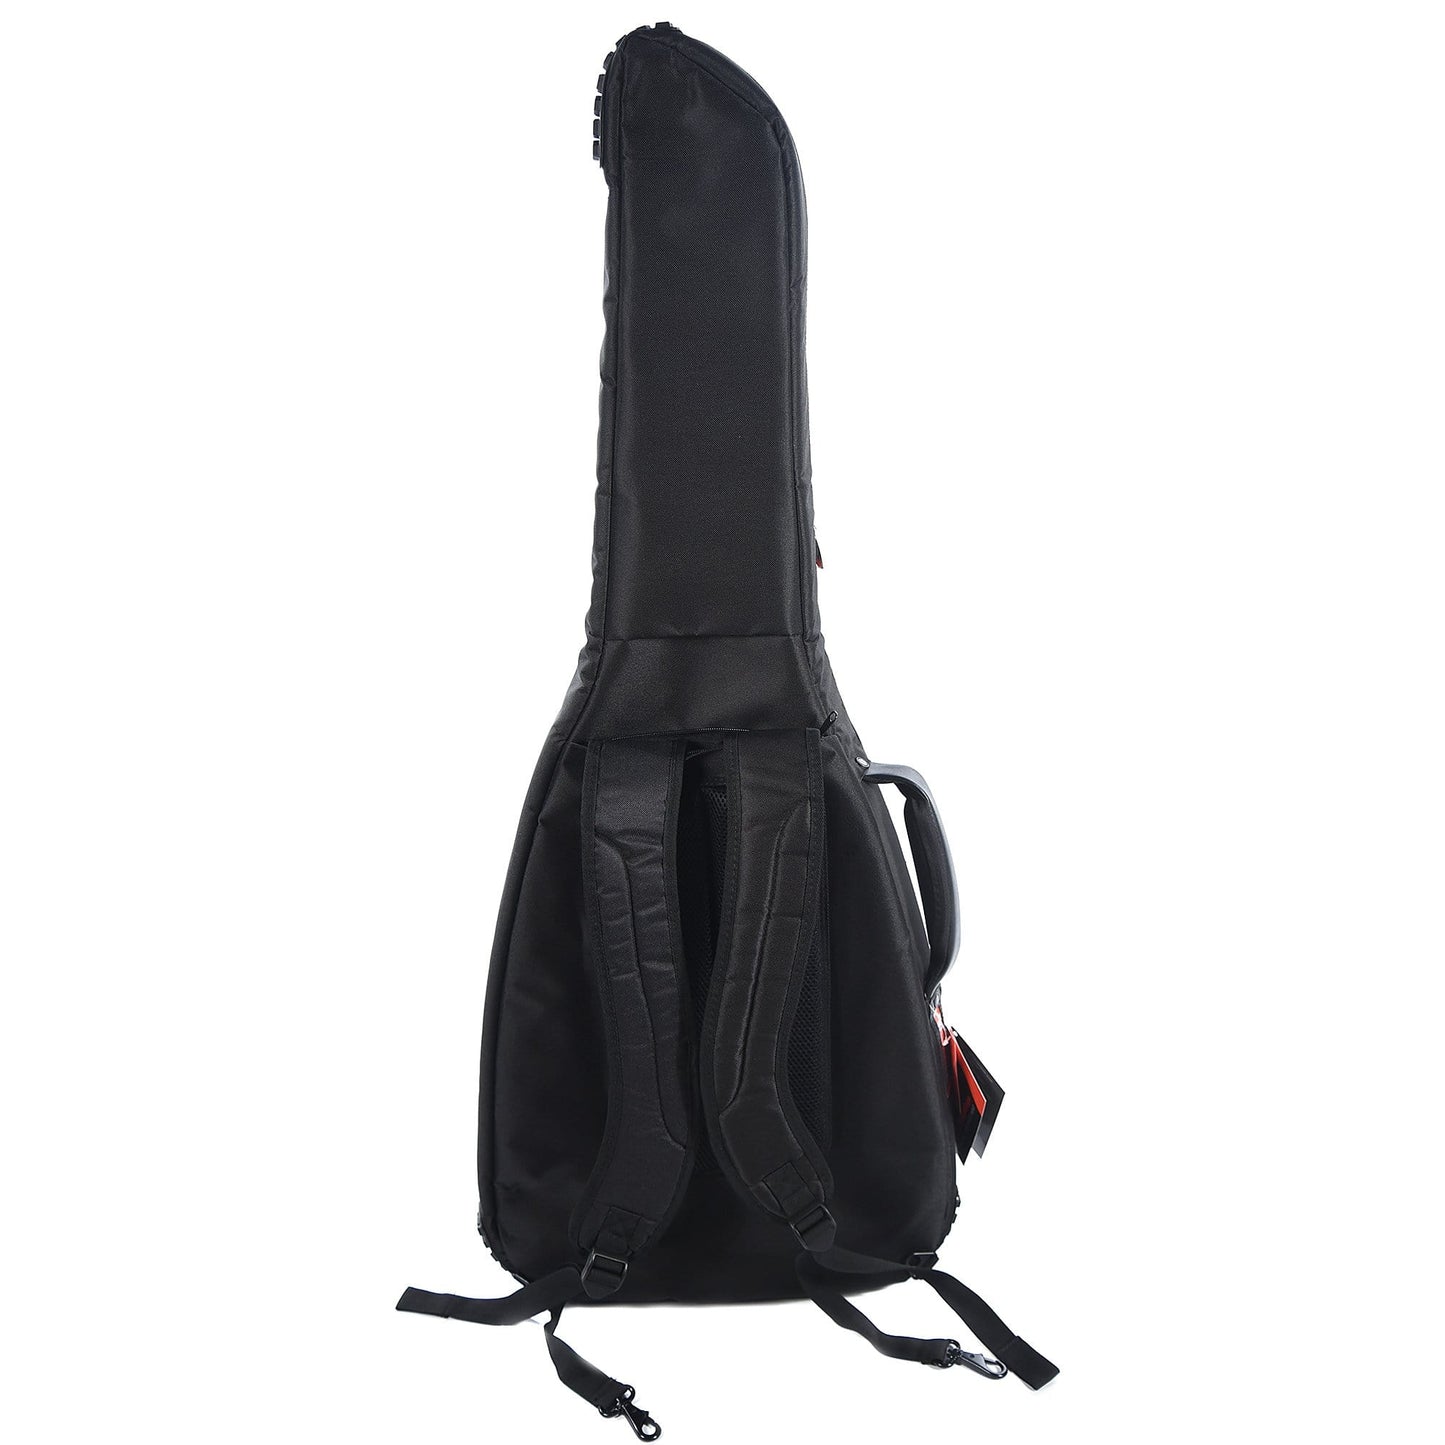 Fender FE620 Gig Bag for Electric Guitar Accessories / Cases and Gig Bags / Guitar Gig Bags